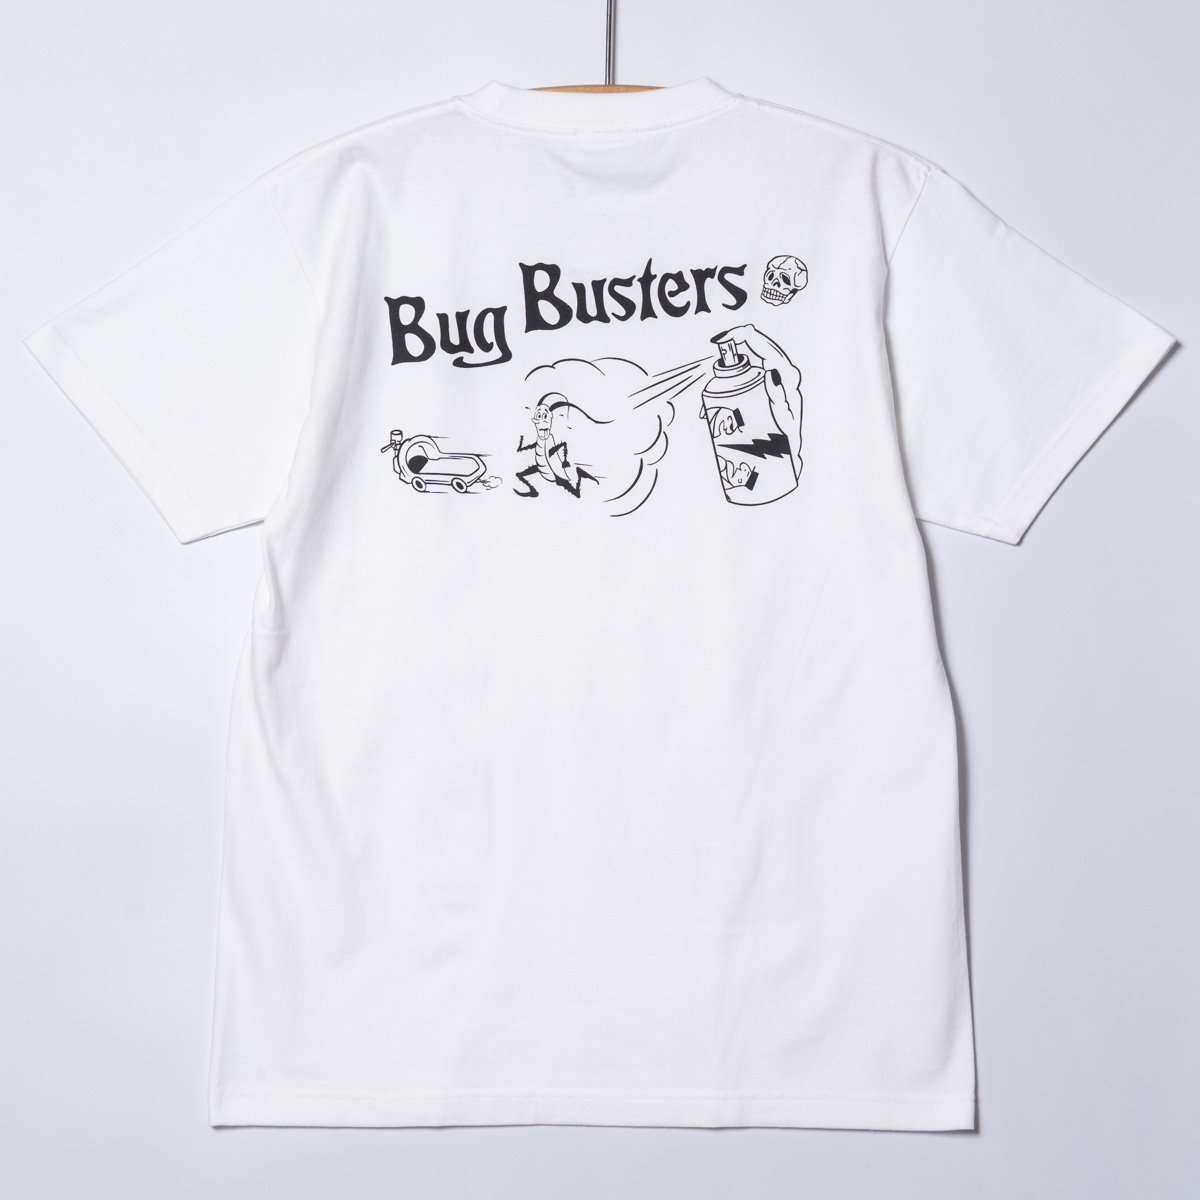 Super HeavyWeight S/S T-shirts “Bug Busters” White - Web store ...